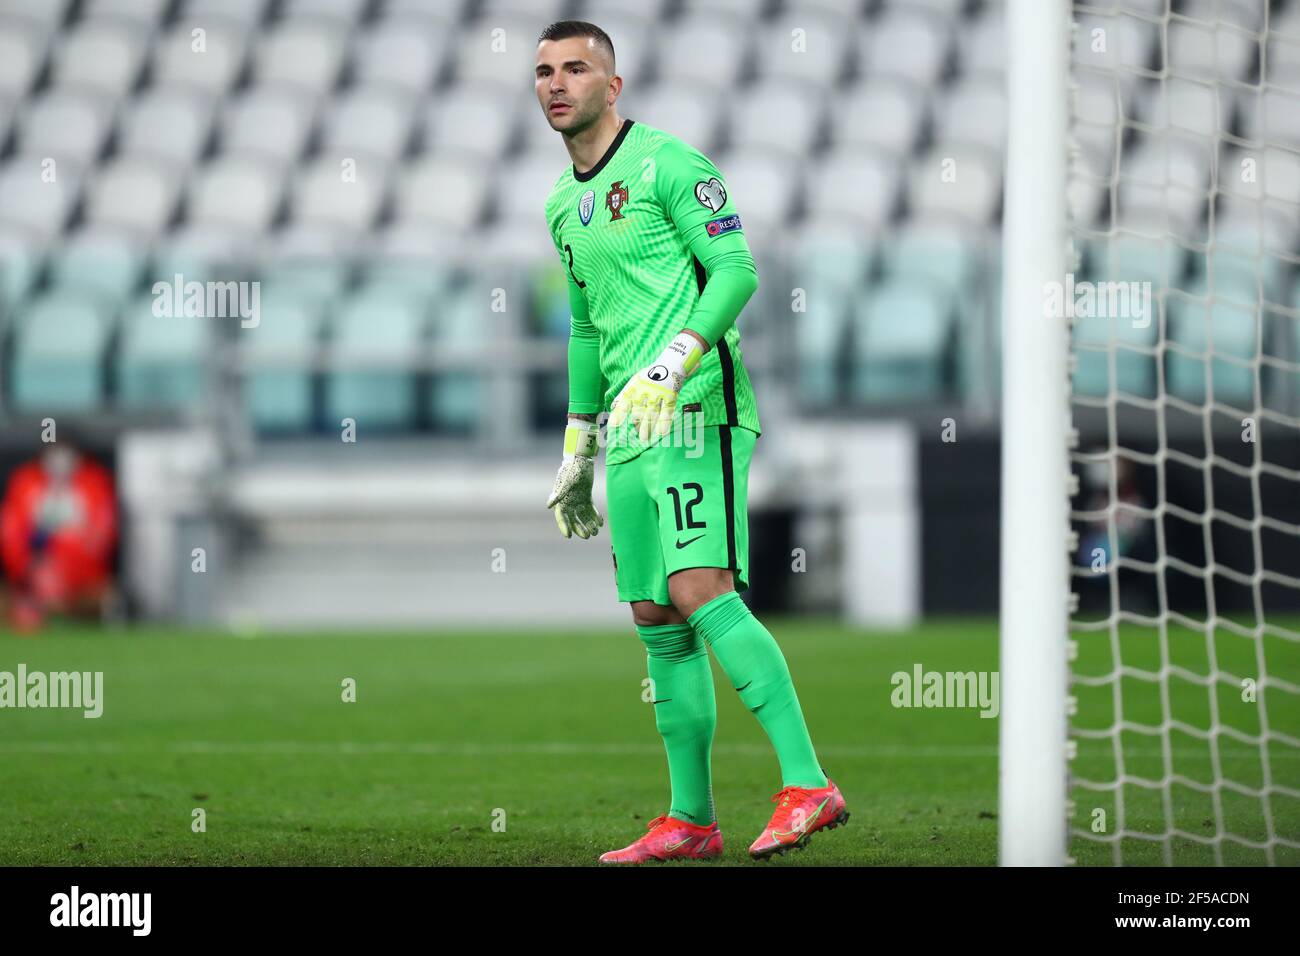 Anthony Lopes of Portugal  looks on during the FIFA World Cup 2022 Qualifiers match between Portugal and Azerbaijan. Portugal wins 1-0 over Azerbaijan. Stock Photo